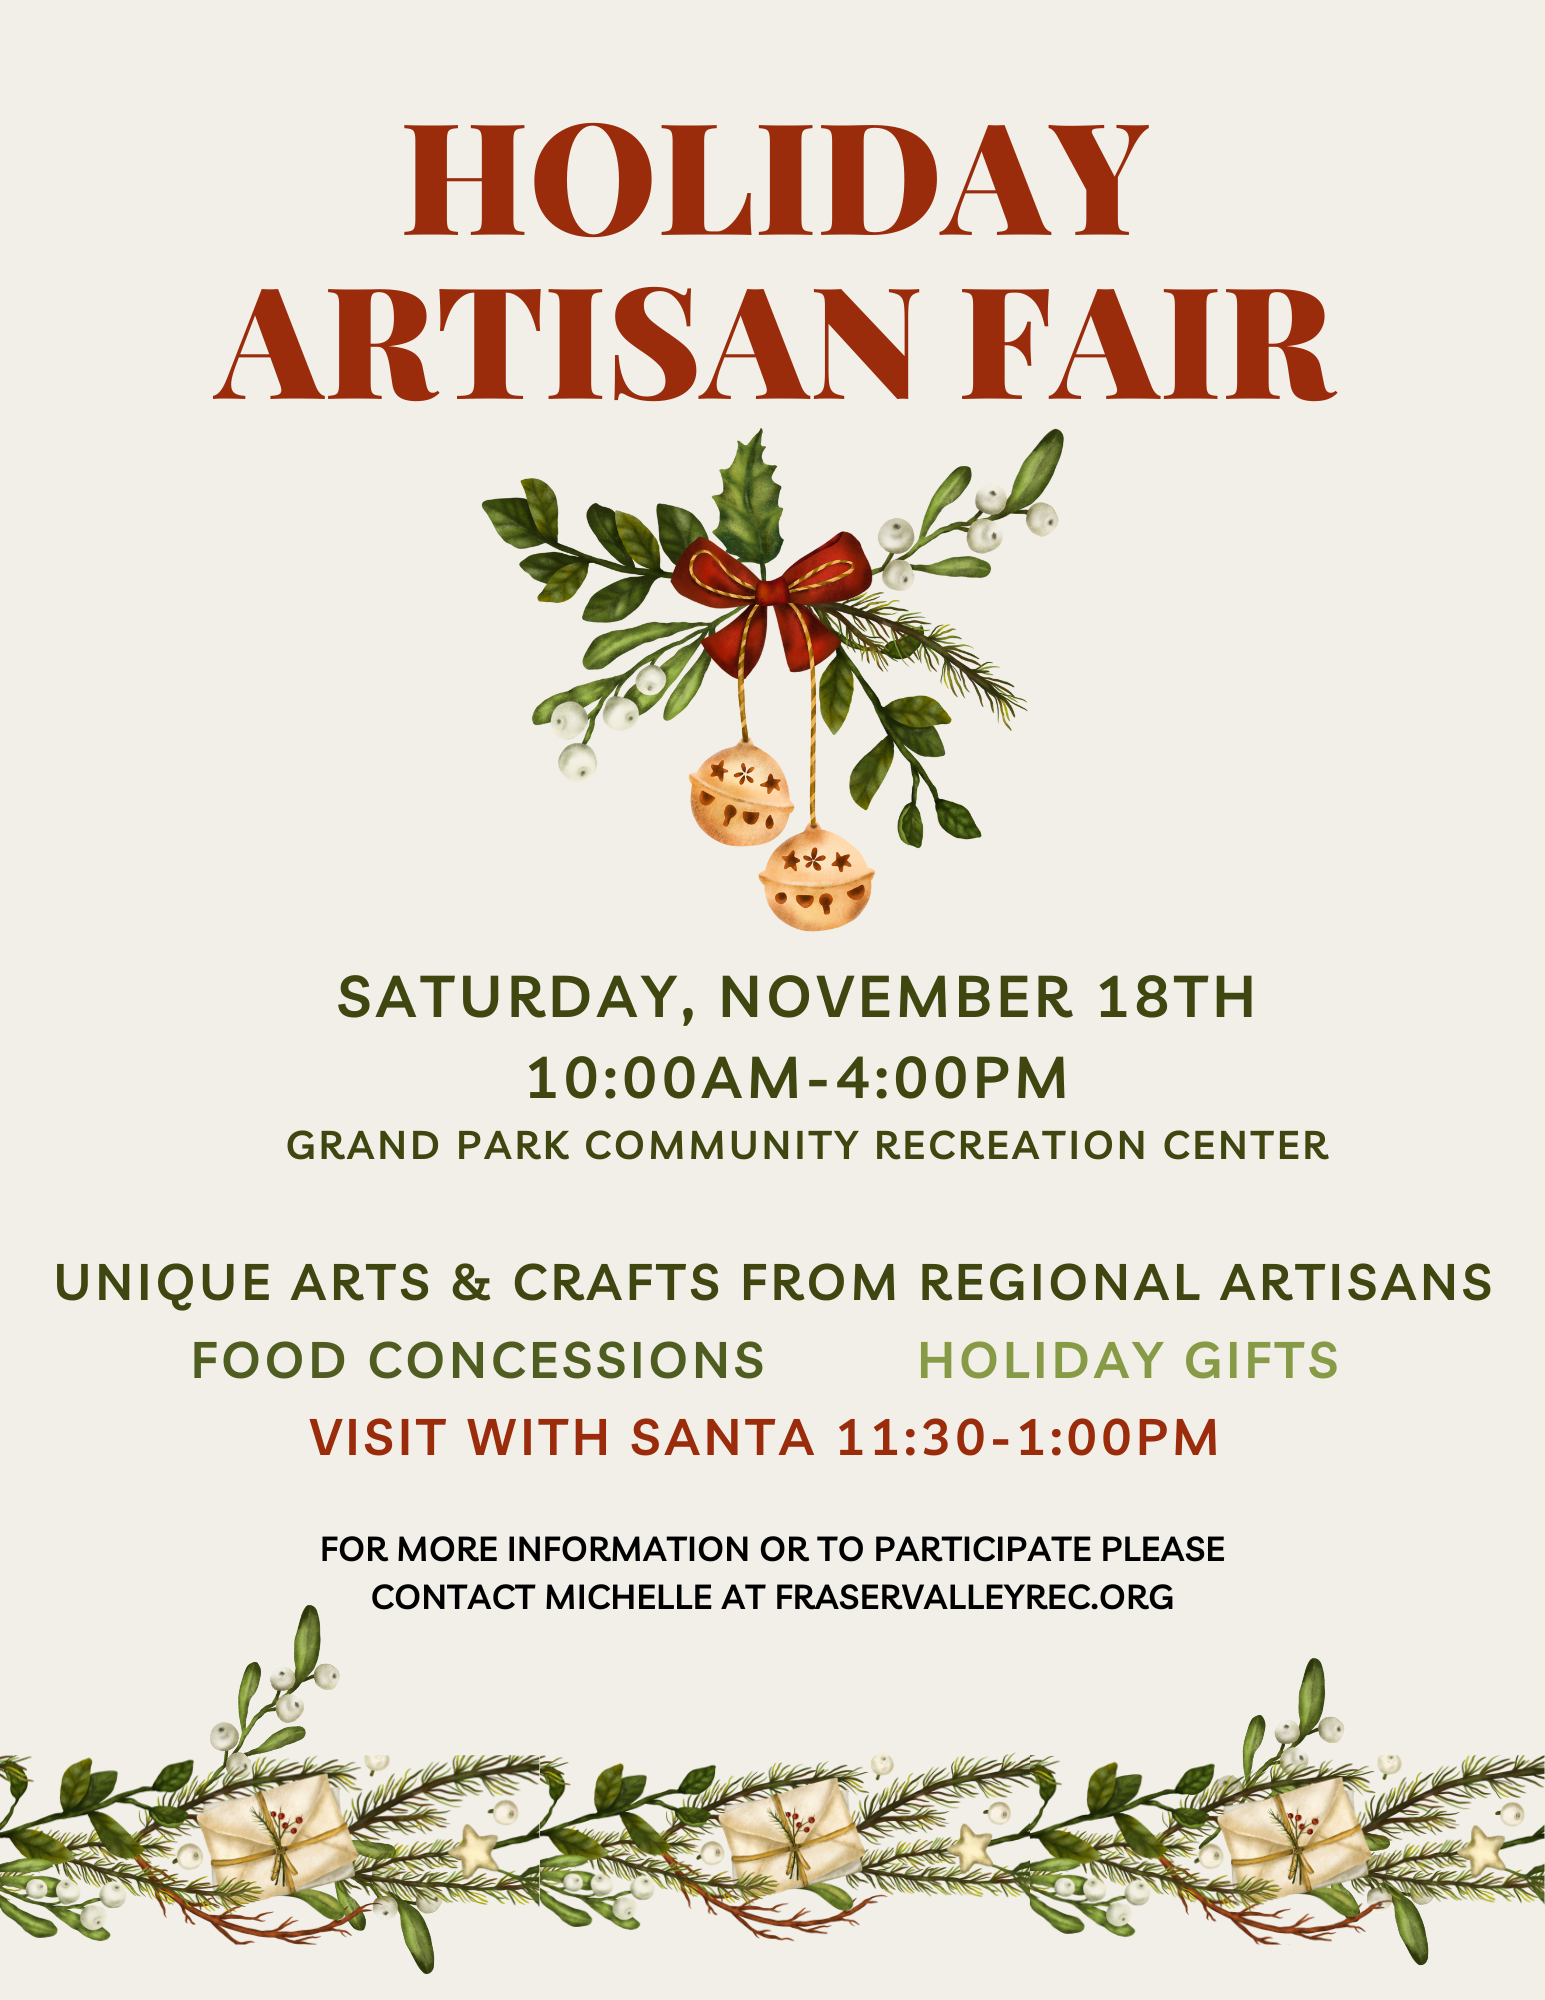 This is a flyer promoting our Holiday Craft Fair on November 18th from 10-4pm at the Grand Park Community Rec Center